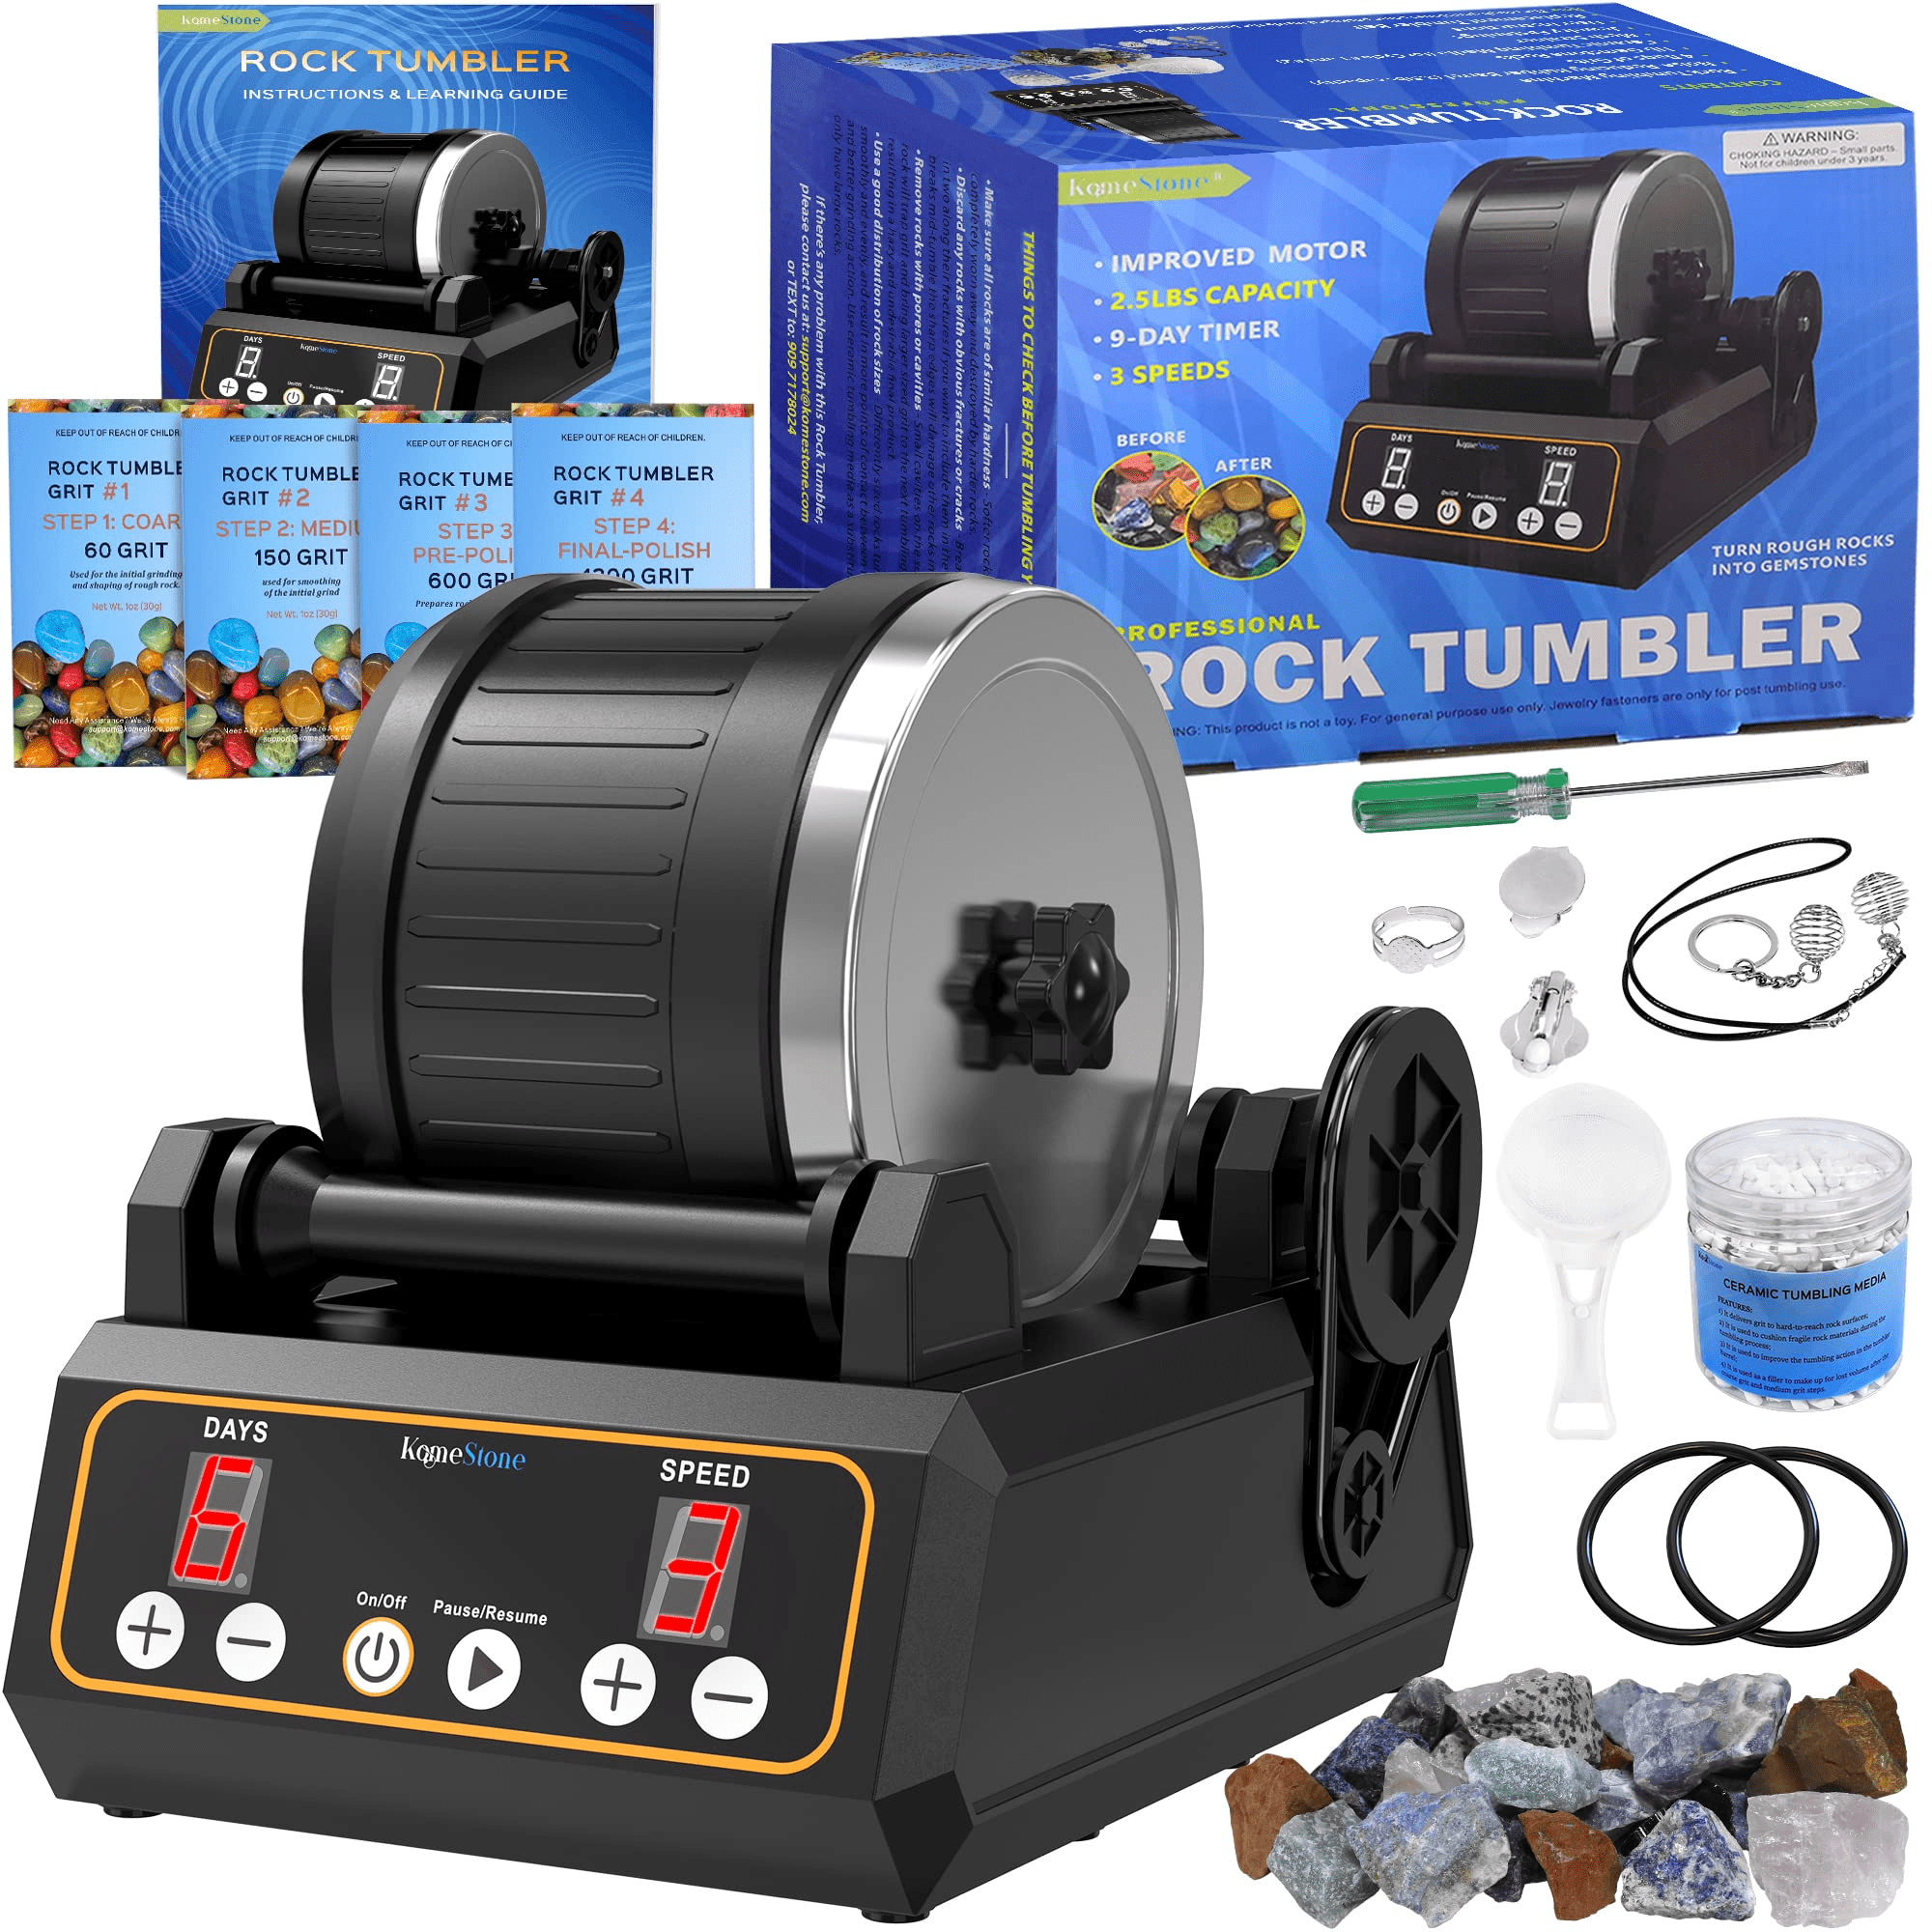 Ansten Rock Tumbler Professional Rock Tumbler kit for Kids Adults, 9-Day  Timer, 3-Speed Motor, Ultra Durable Belt, Reusable TPE Plastic Polish,  Rough Stones, Educational Projects for Boys Girls 